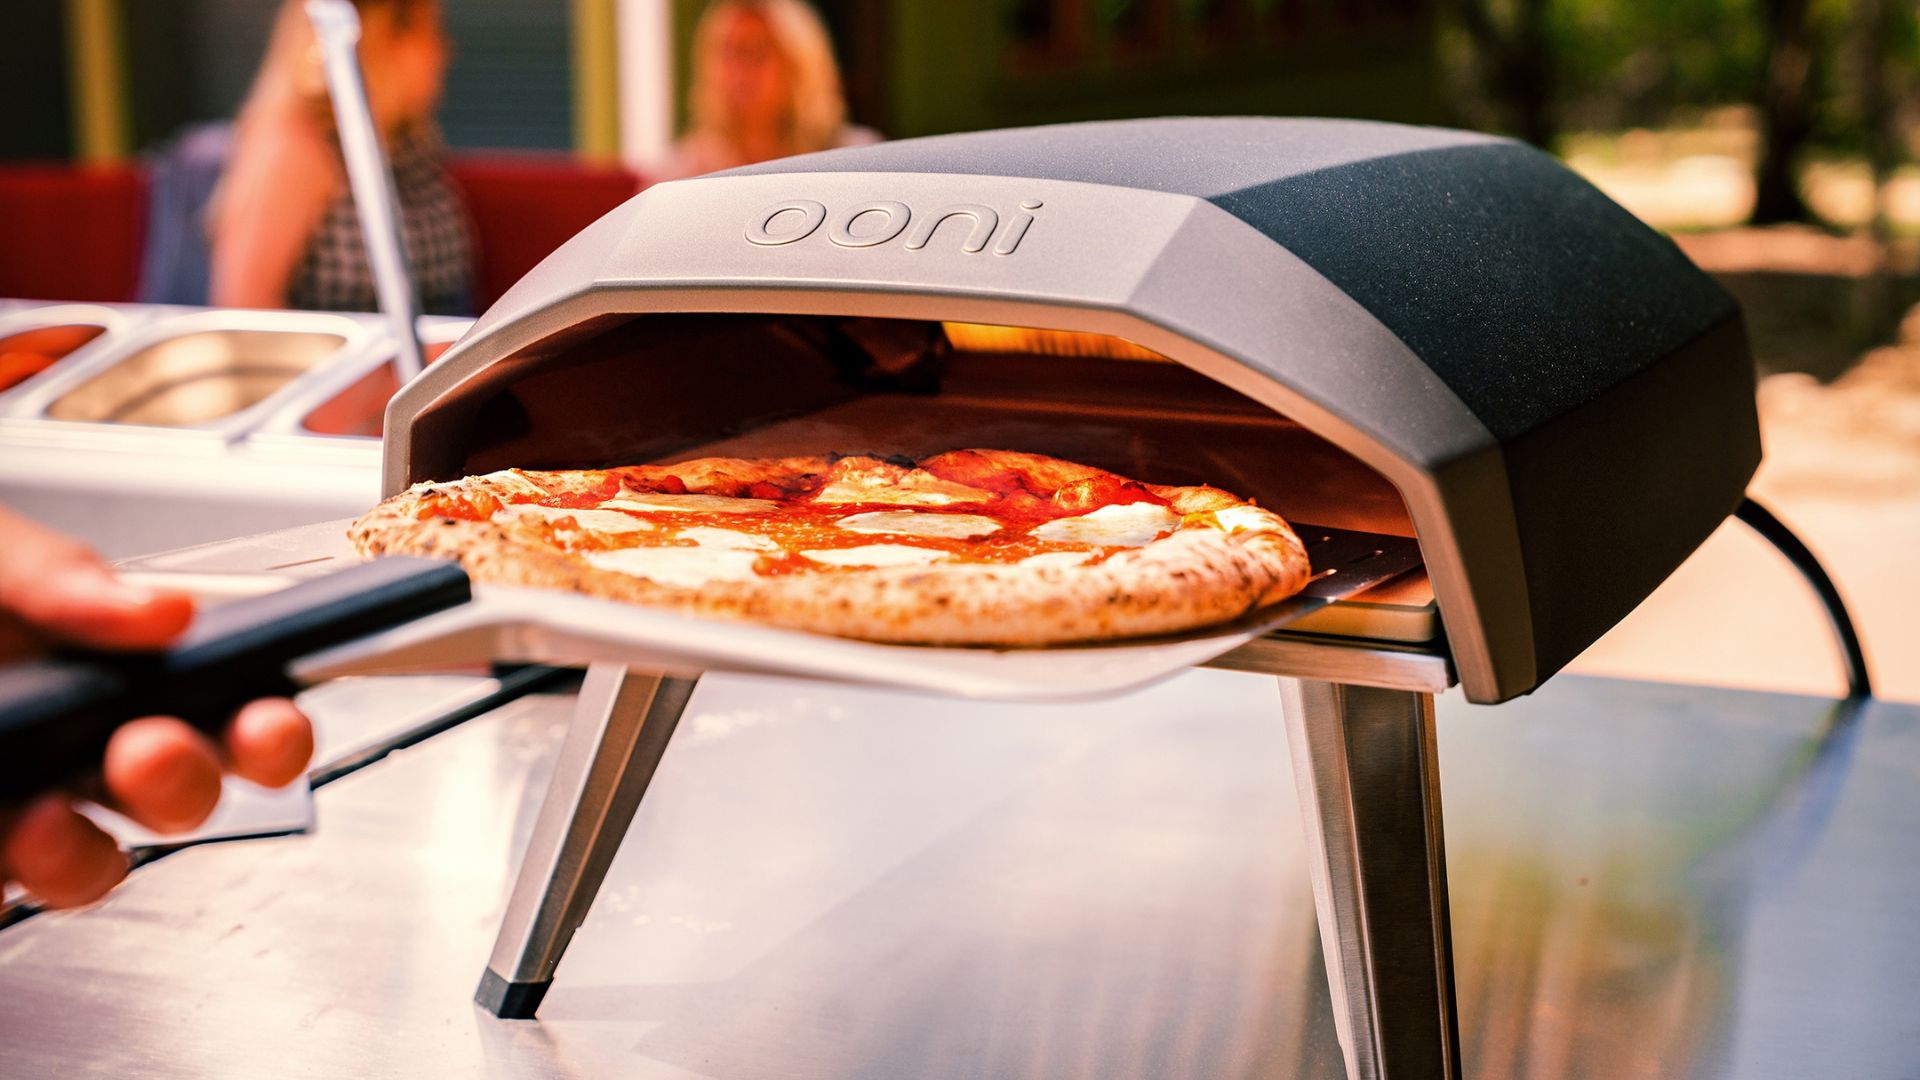 Ooni Koda 12 Gas Powered Pizza Oven Charcoal/Stainless